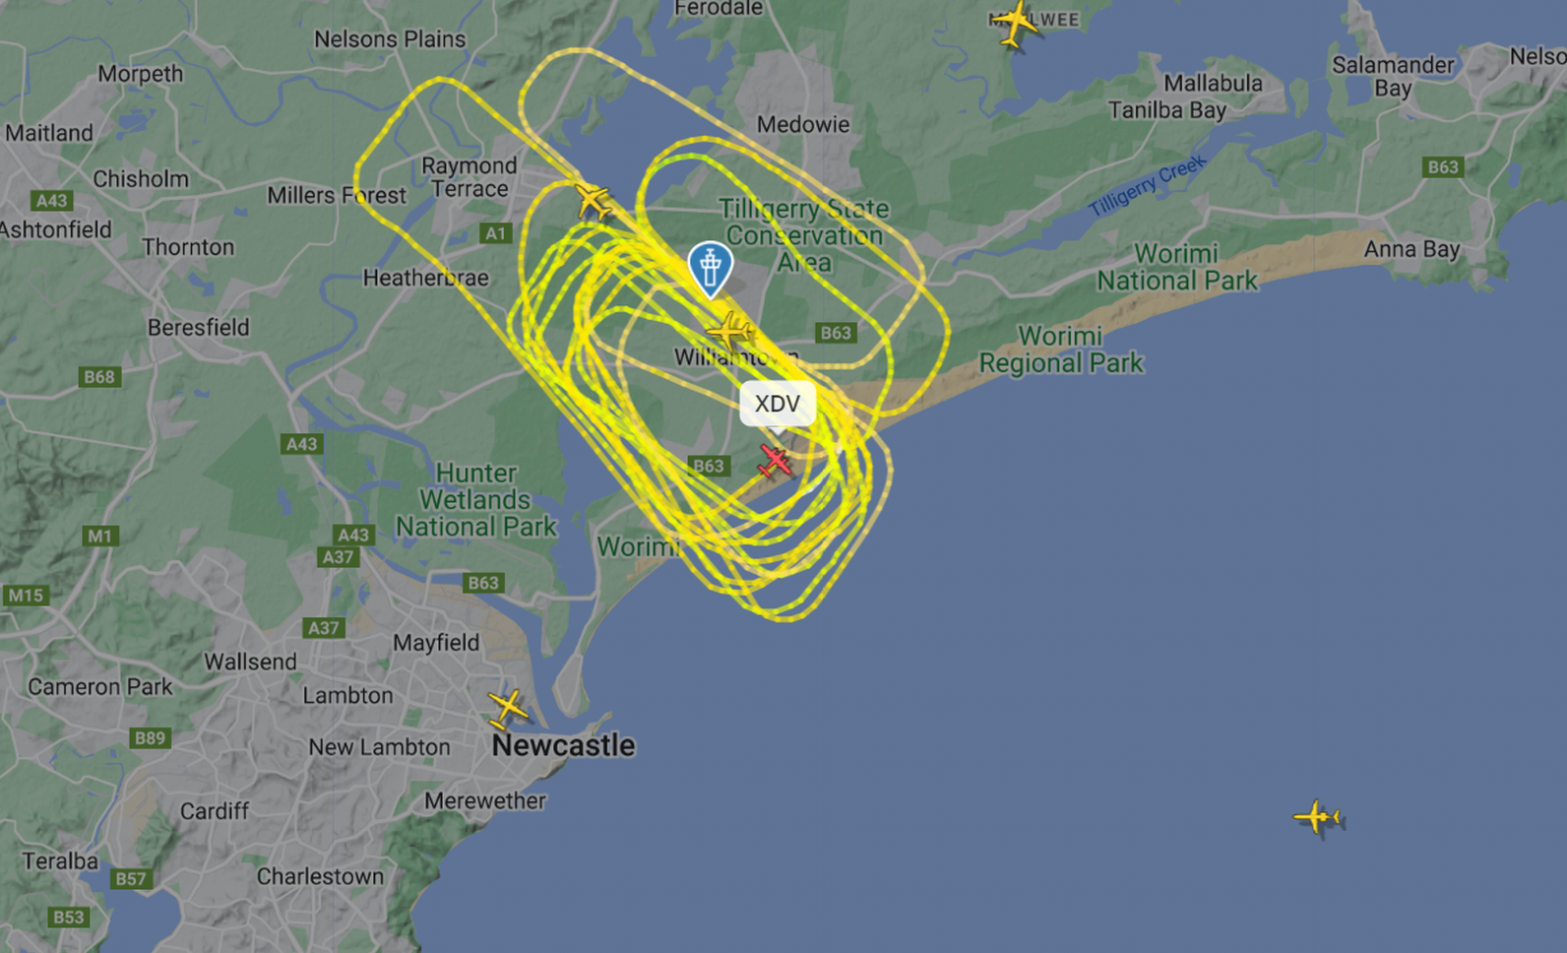 A Plane Is Circling Above Newcastle Airport After Its Landing Gear Failed While Mid-Air